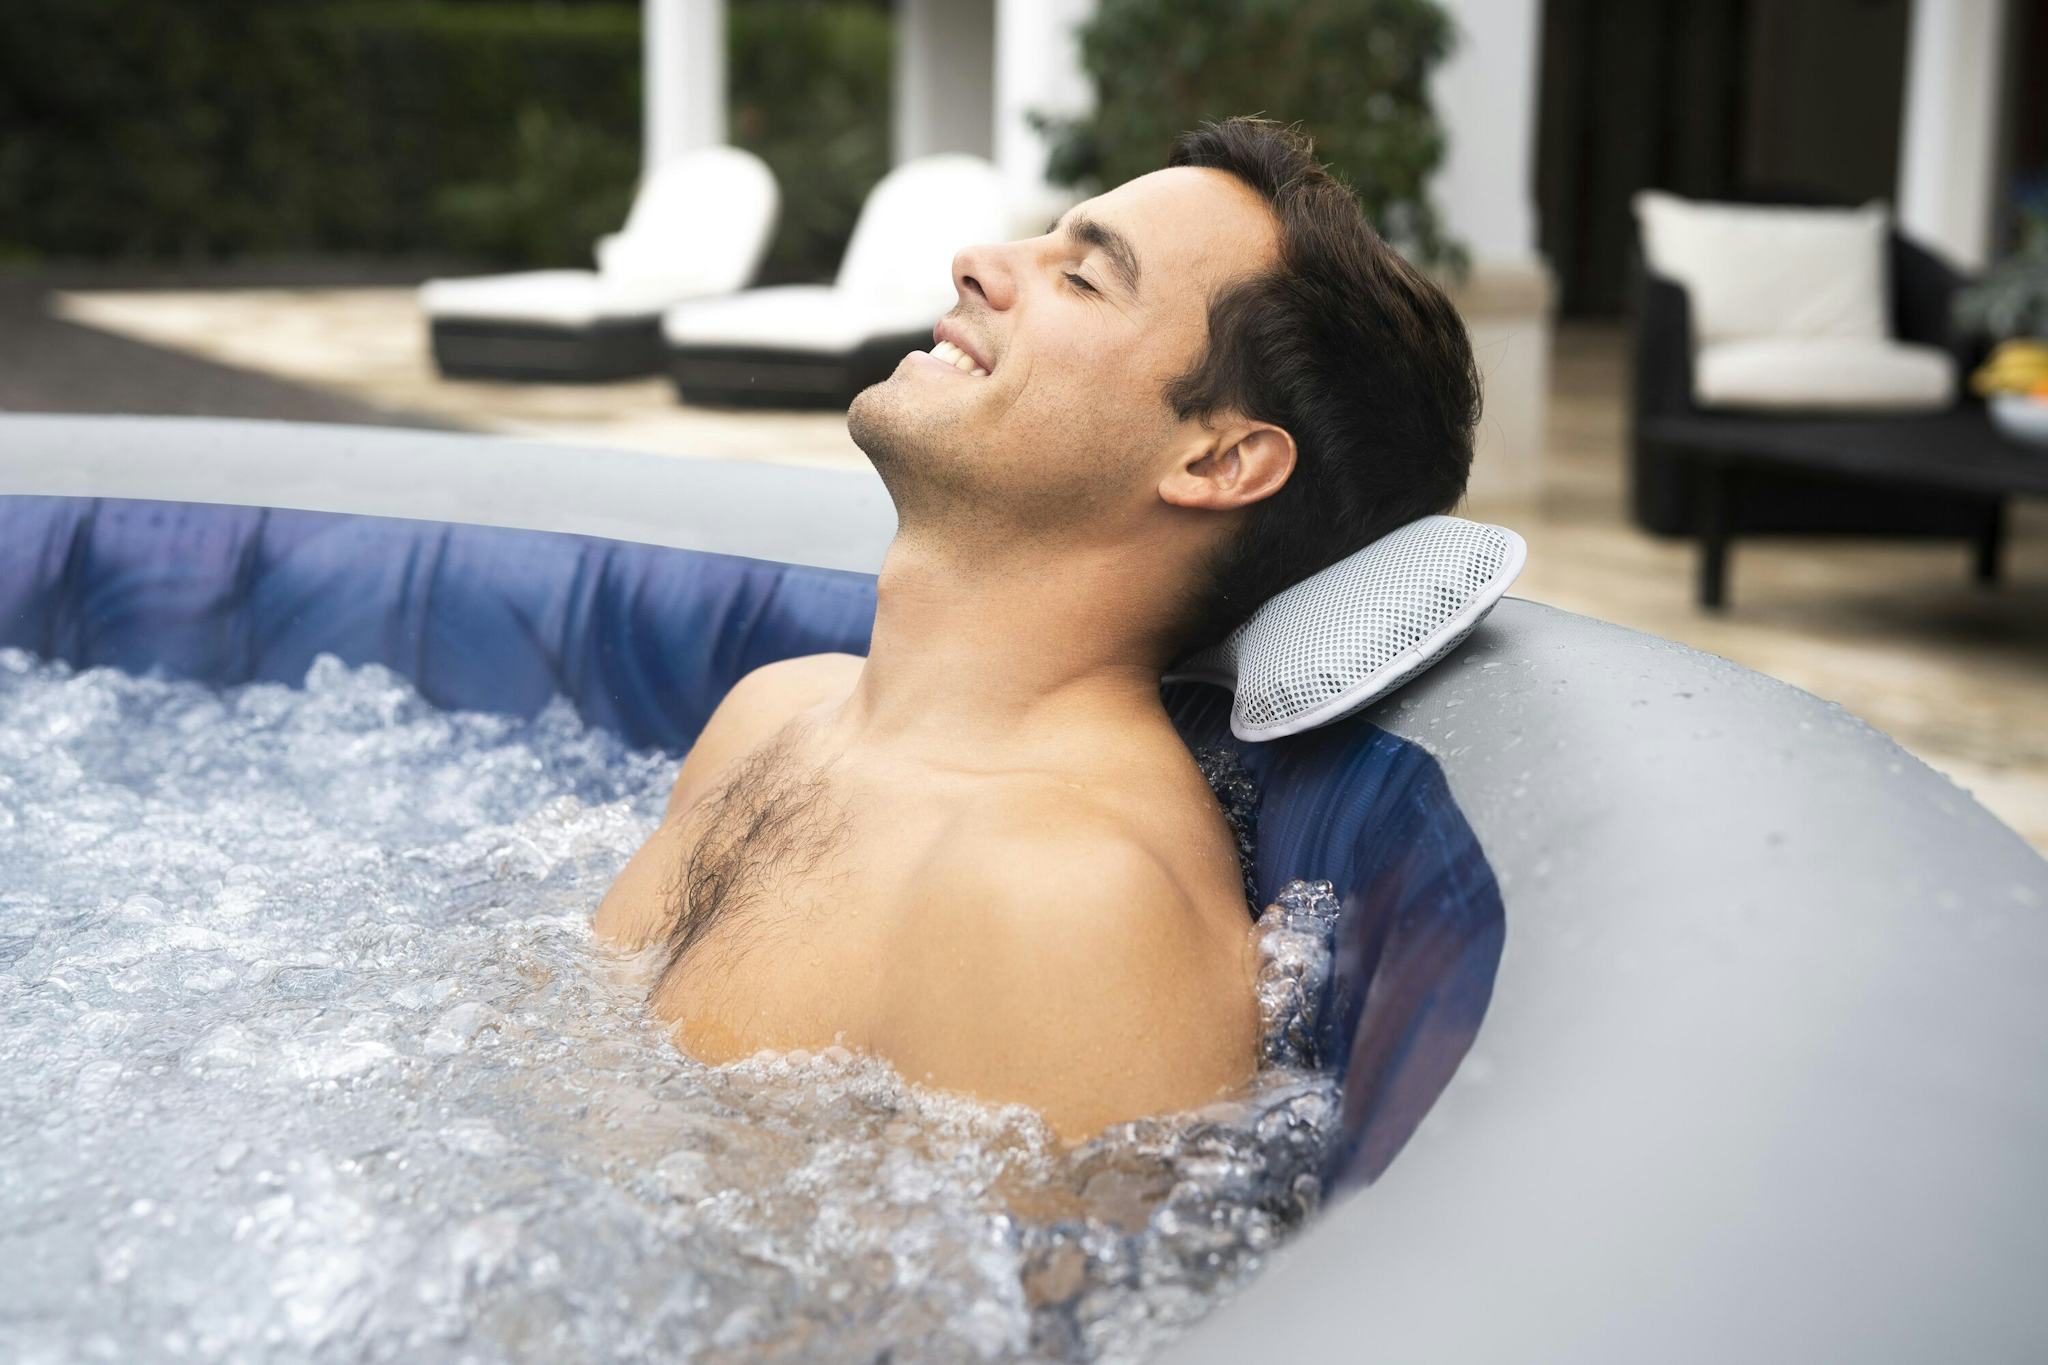 Spas Gonflables Spa gonflable rond Lay-Z-Spa Santorini Hydrojet pro™ 5 - 7 personnes Bestway 25